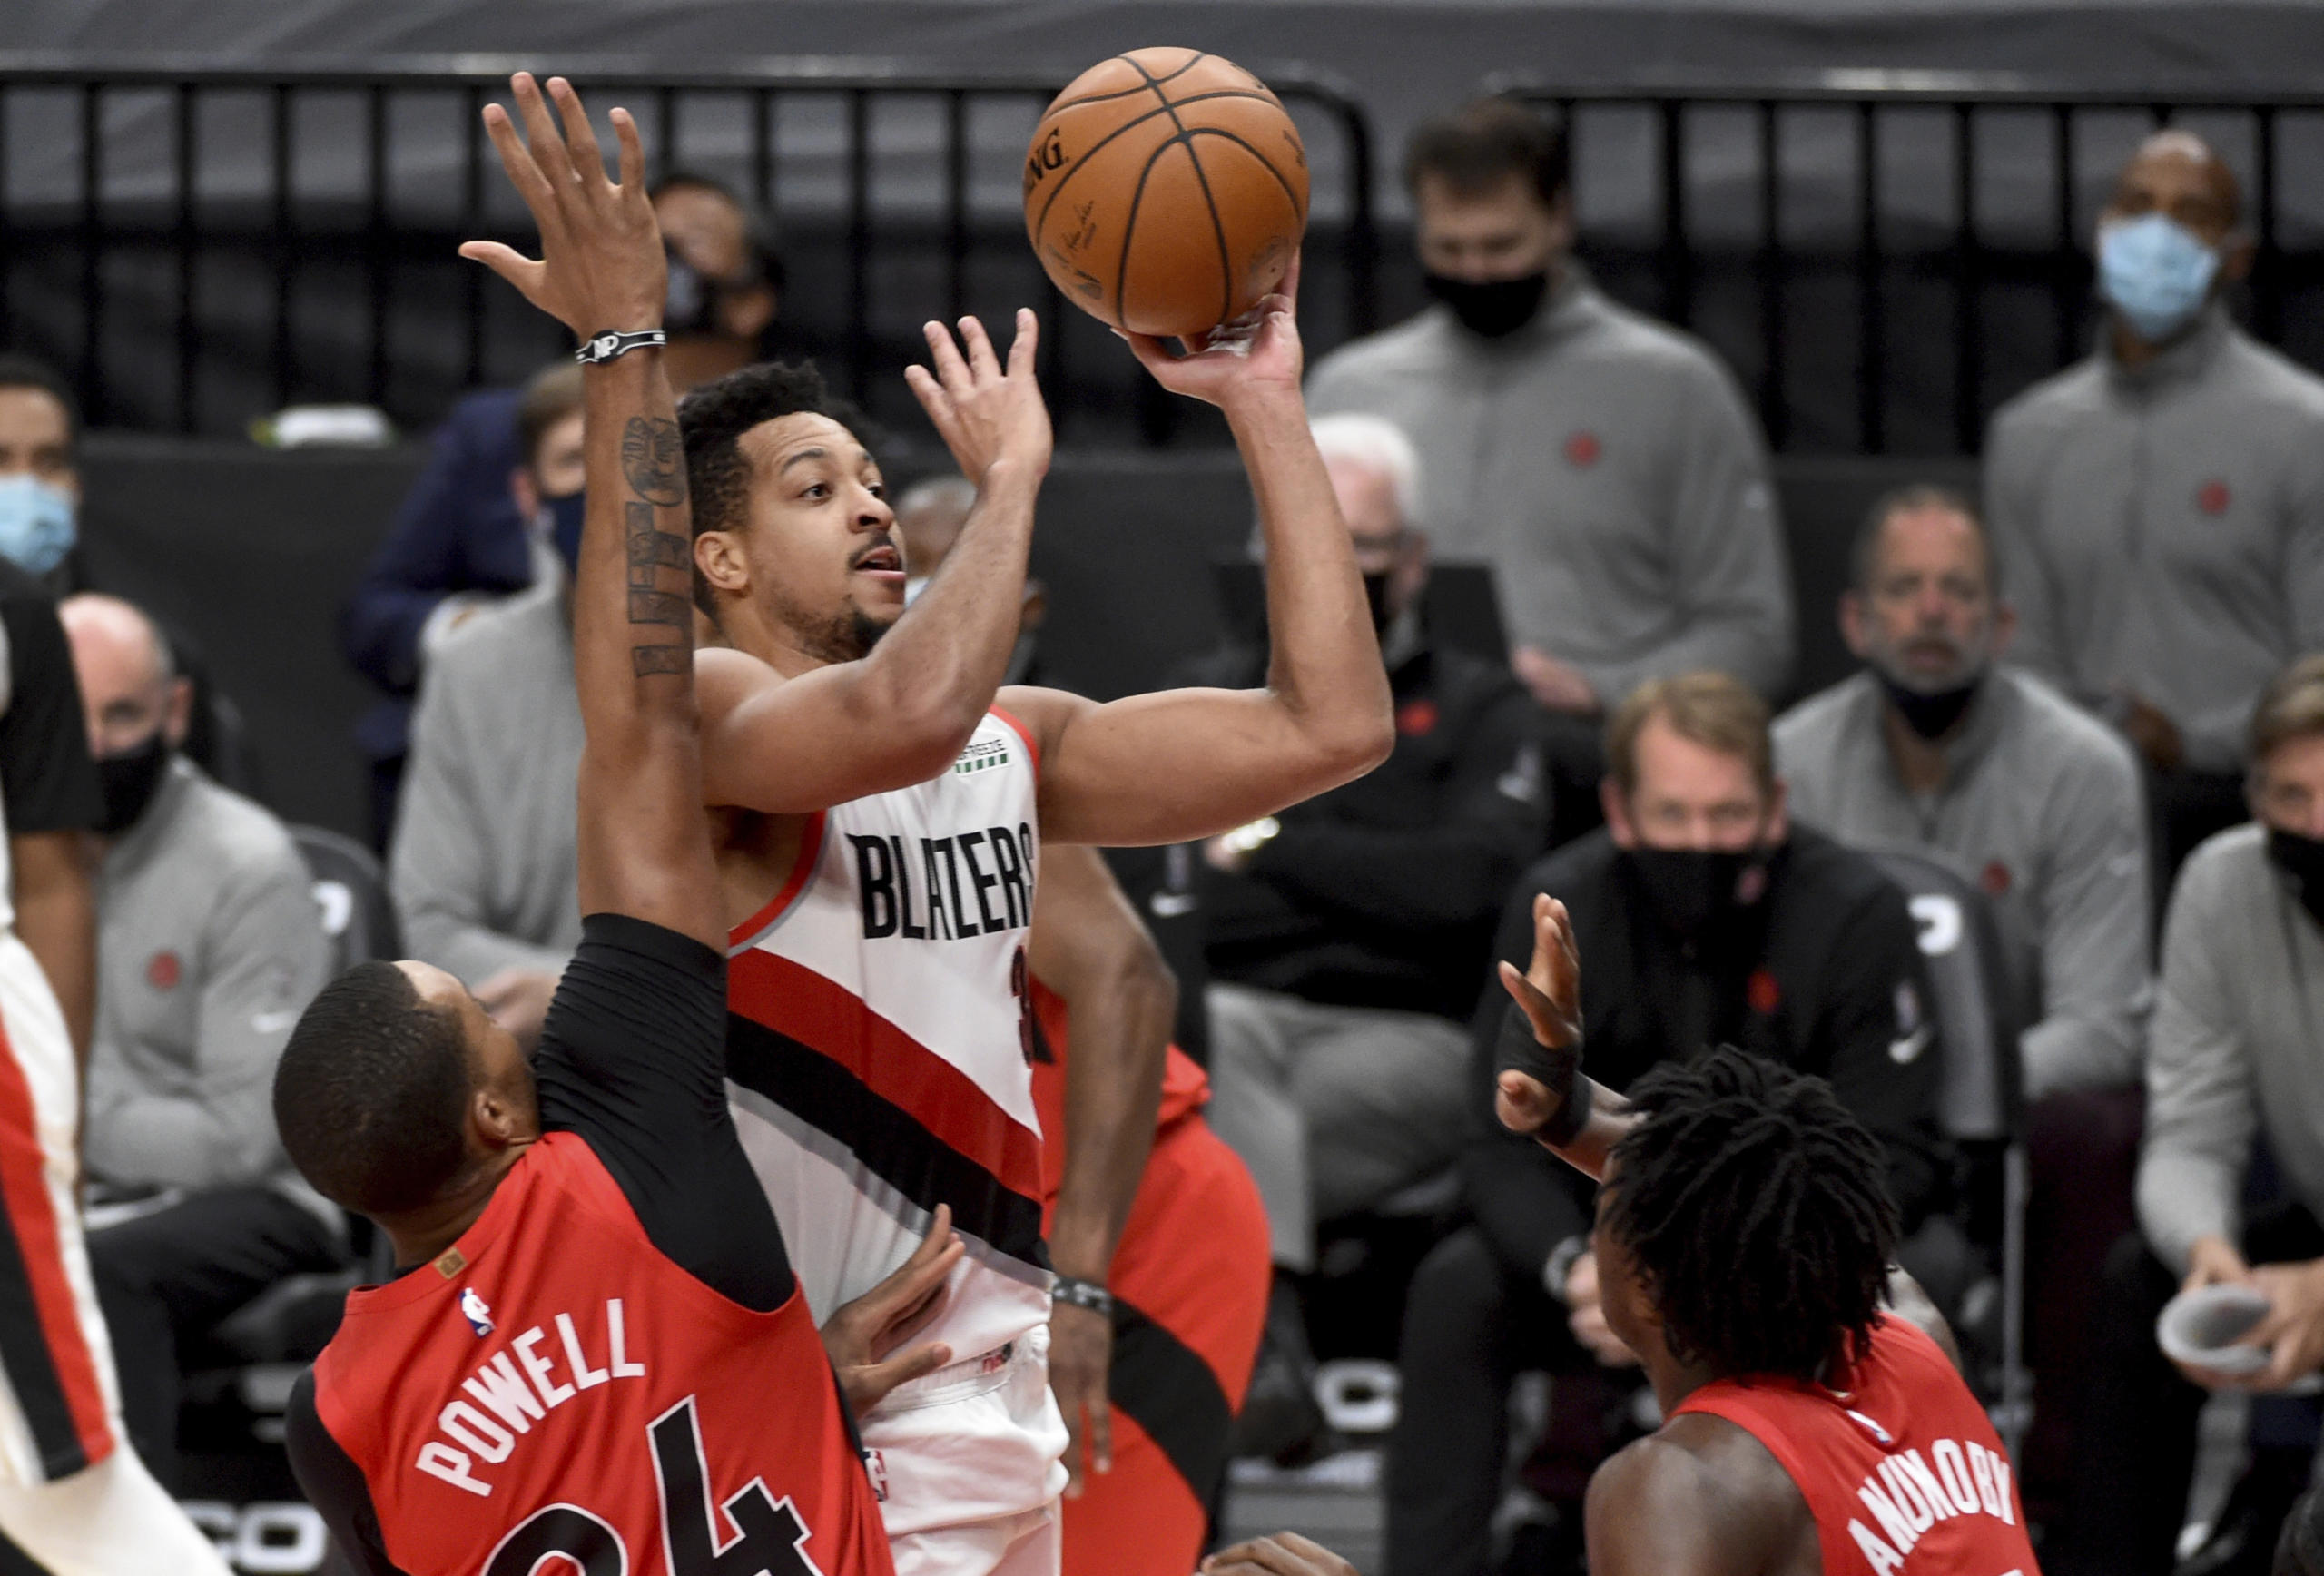 Portland Trail Blazers guard CJ McCollum, center, drives to the basket on Toronto Raptors guard Norman Powell, left, and forward OG Anunoby, right, during the second half of an NBA basketball game in Portland, Ore., Monday, Jan. 11, 2021. The Blazers won 112-111.